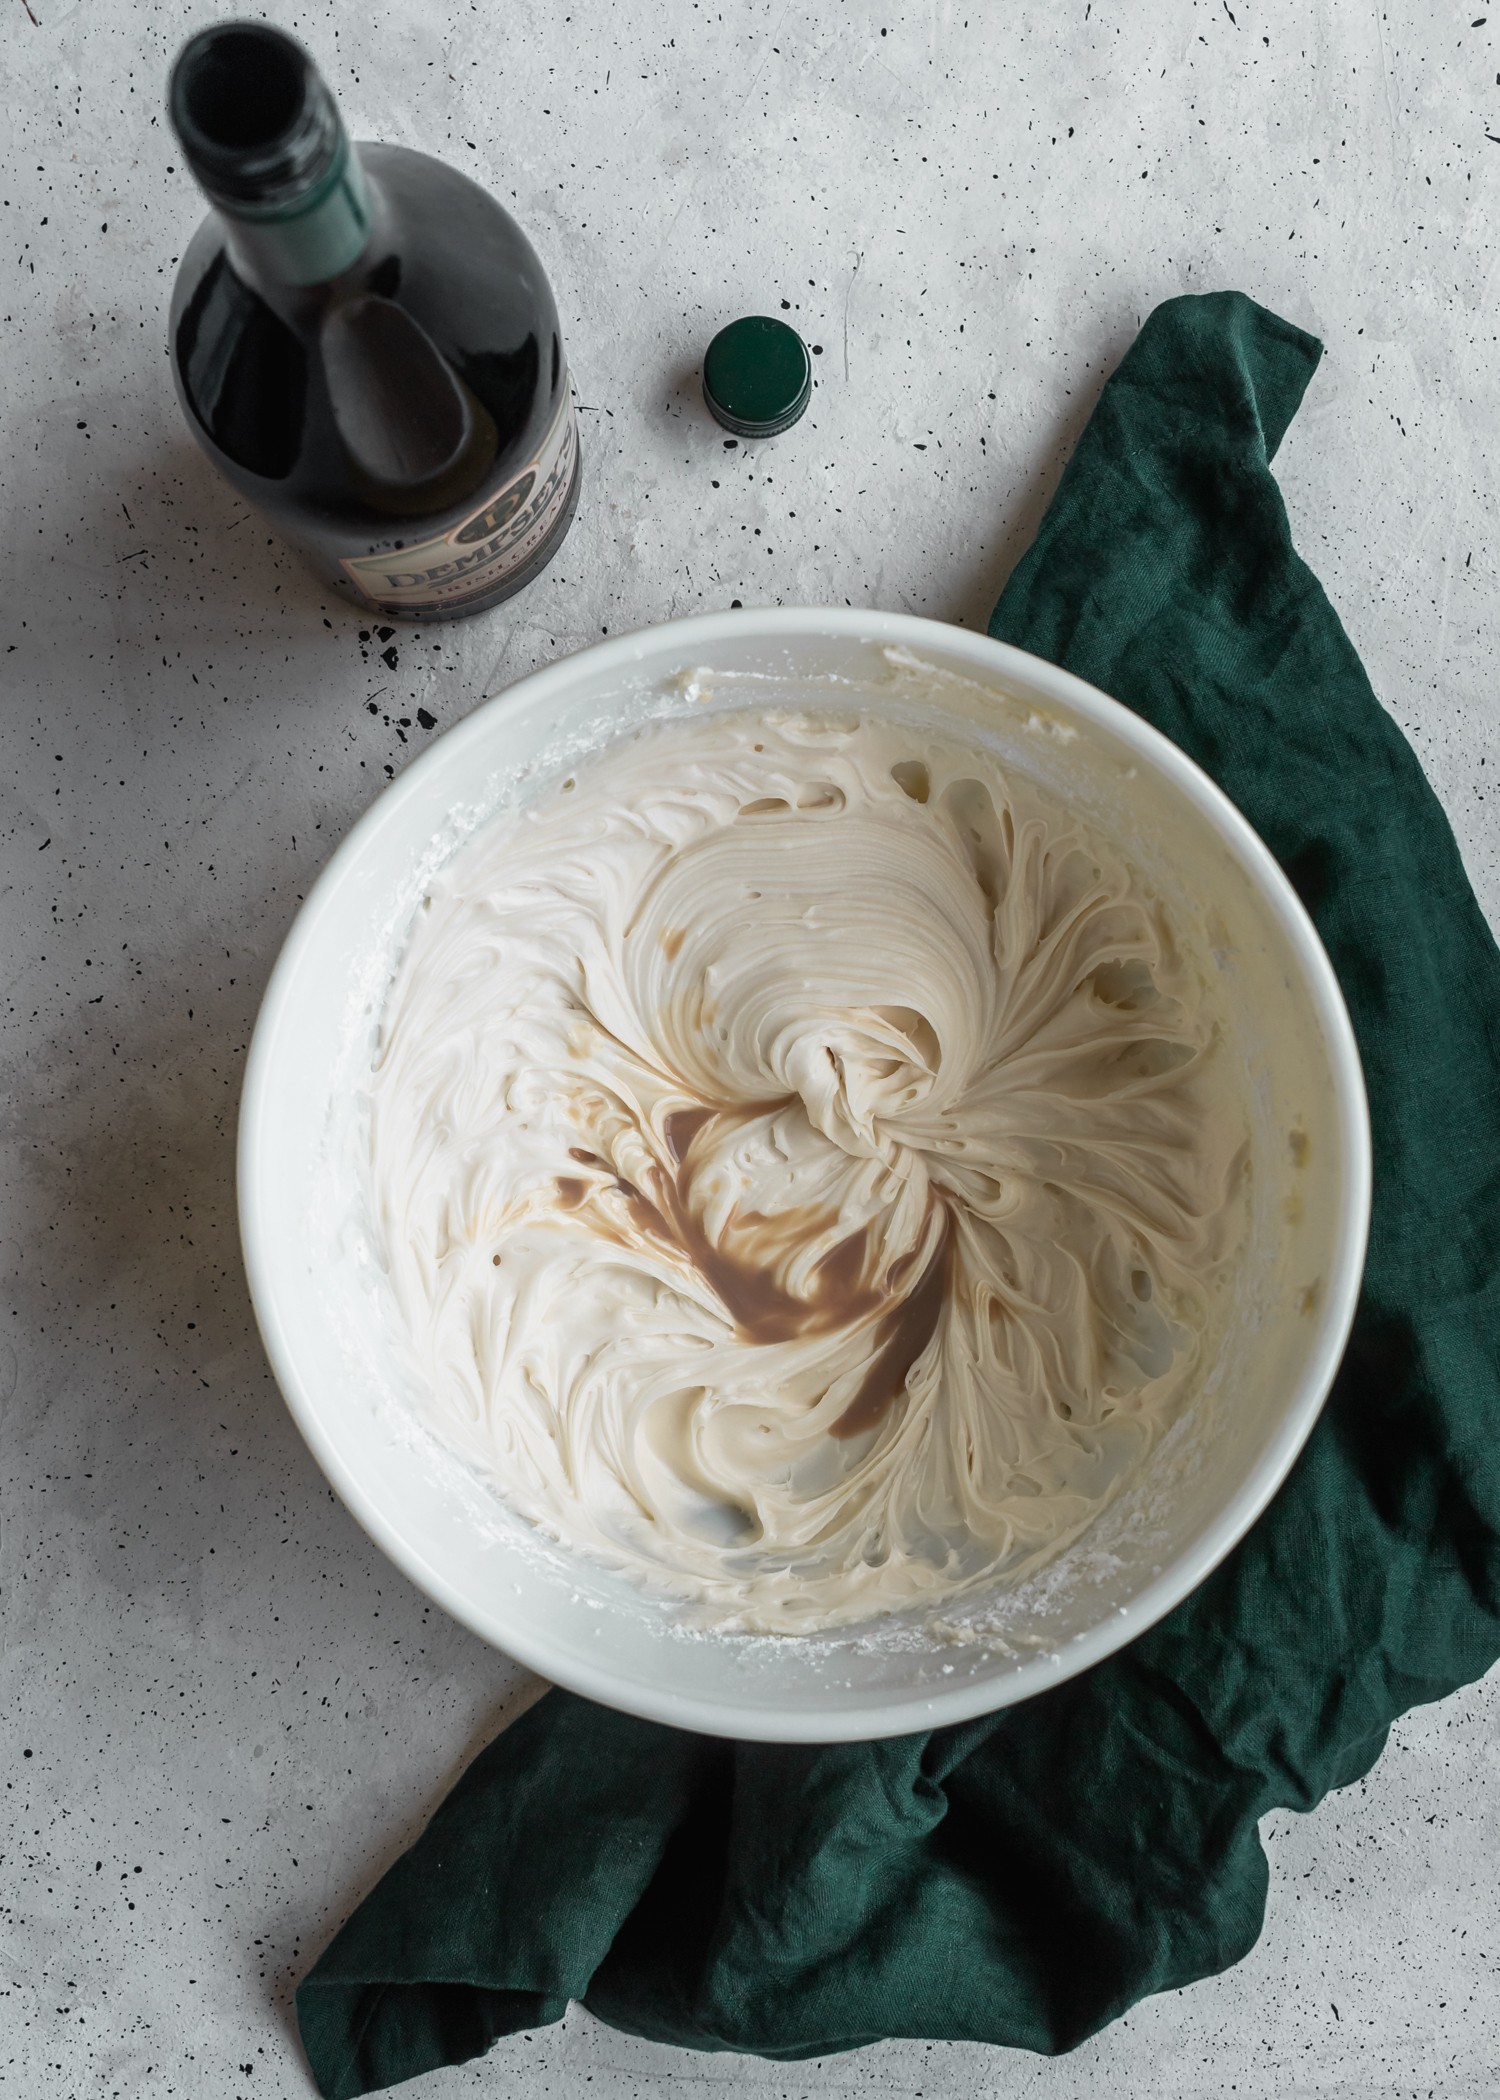 A bowl of cream cheese frosting with a drizzle of Irish cream in the center. There is an opened bottle of Irish cream in the left corner.